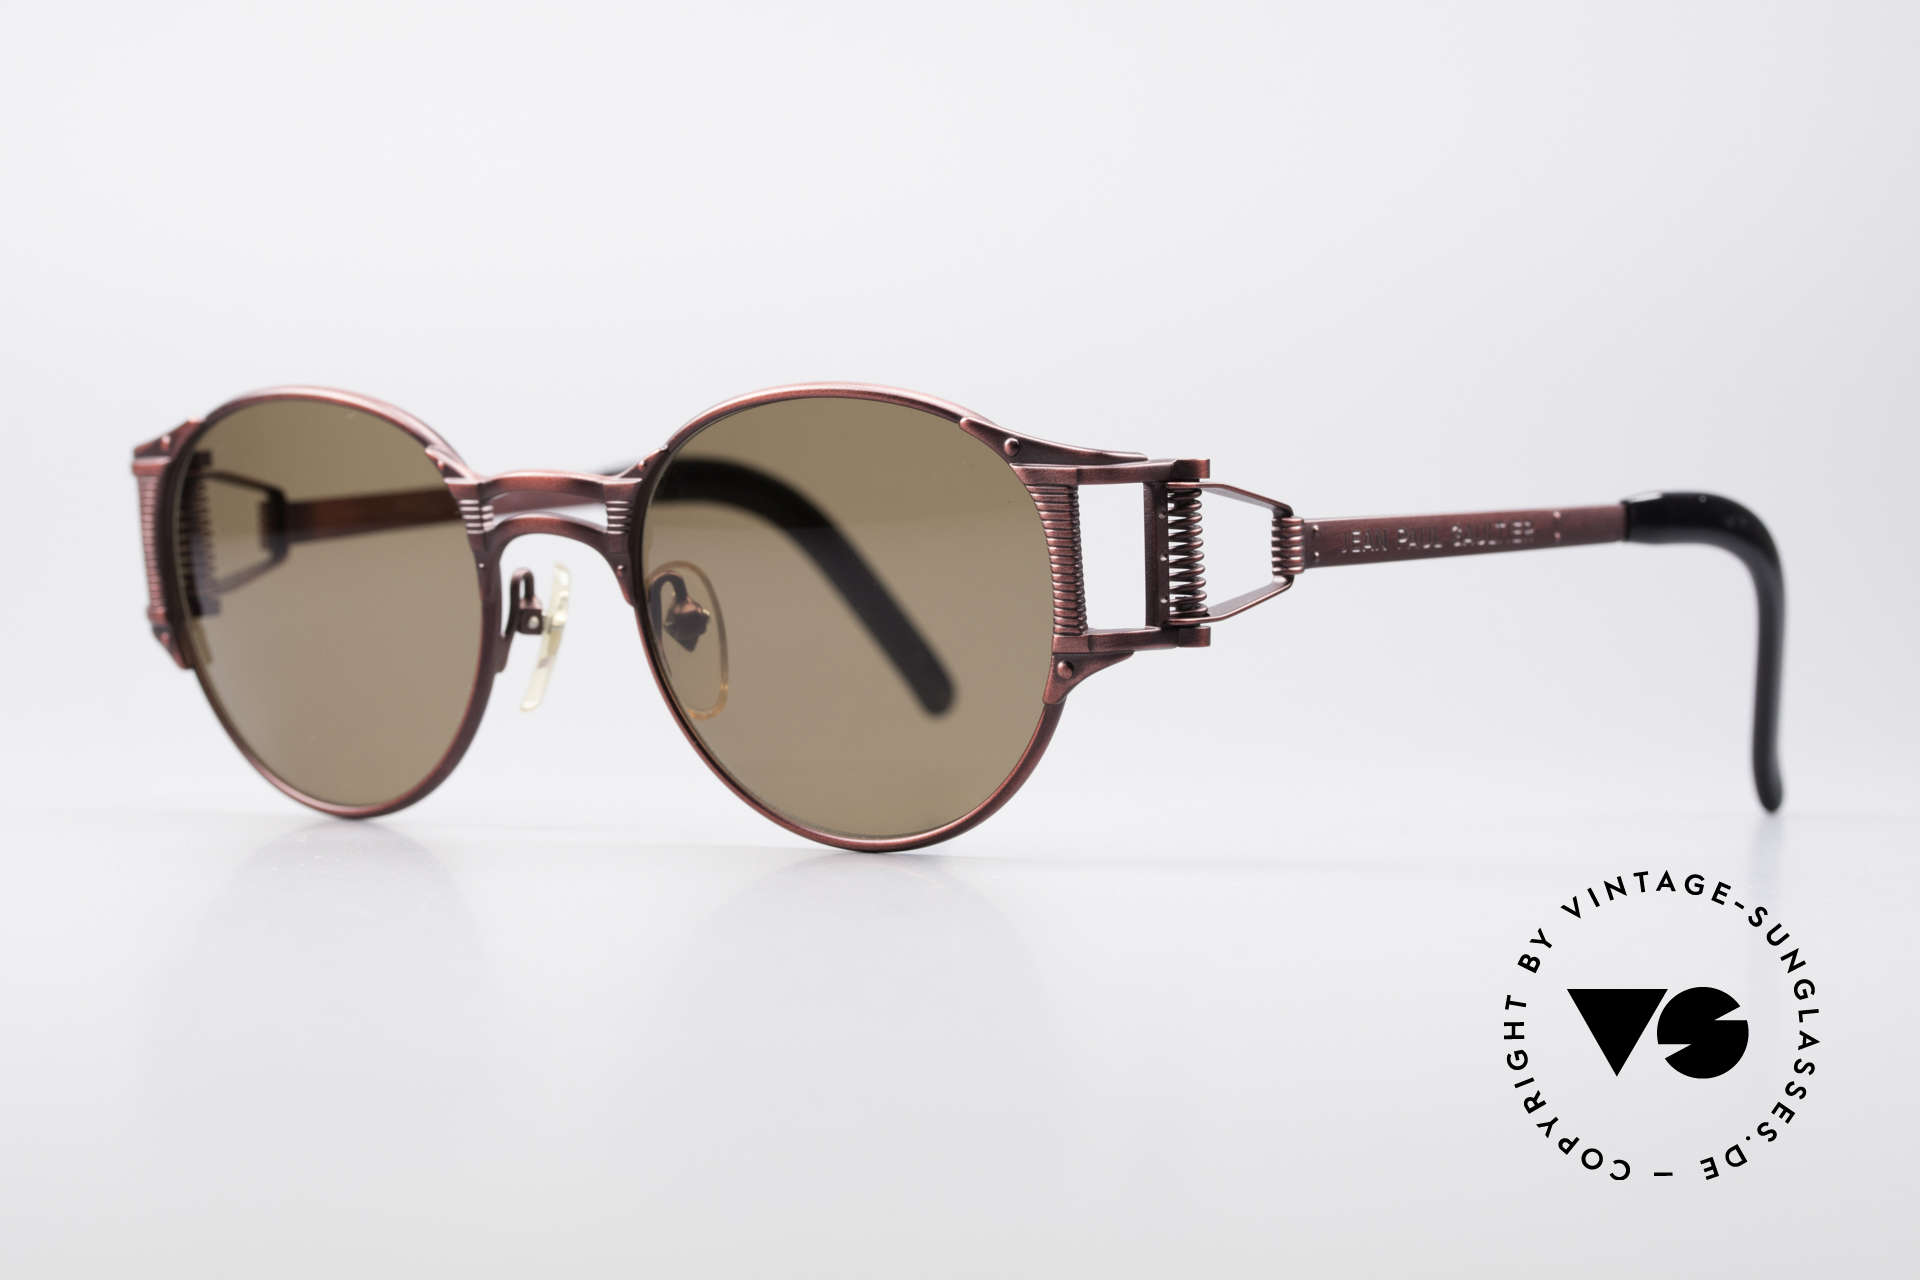 Jean Paul Gaultier 56-5105 Rare Celebrity Sunglasses, celebrity shades: worn by various US Rapper, Hip-Hop, Made for Men and Women